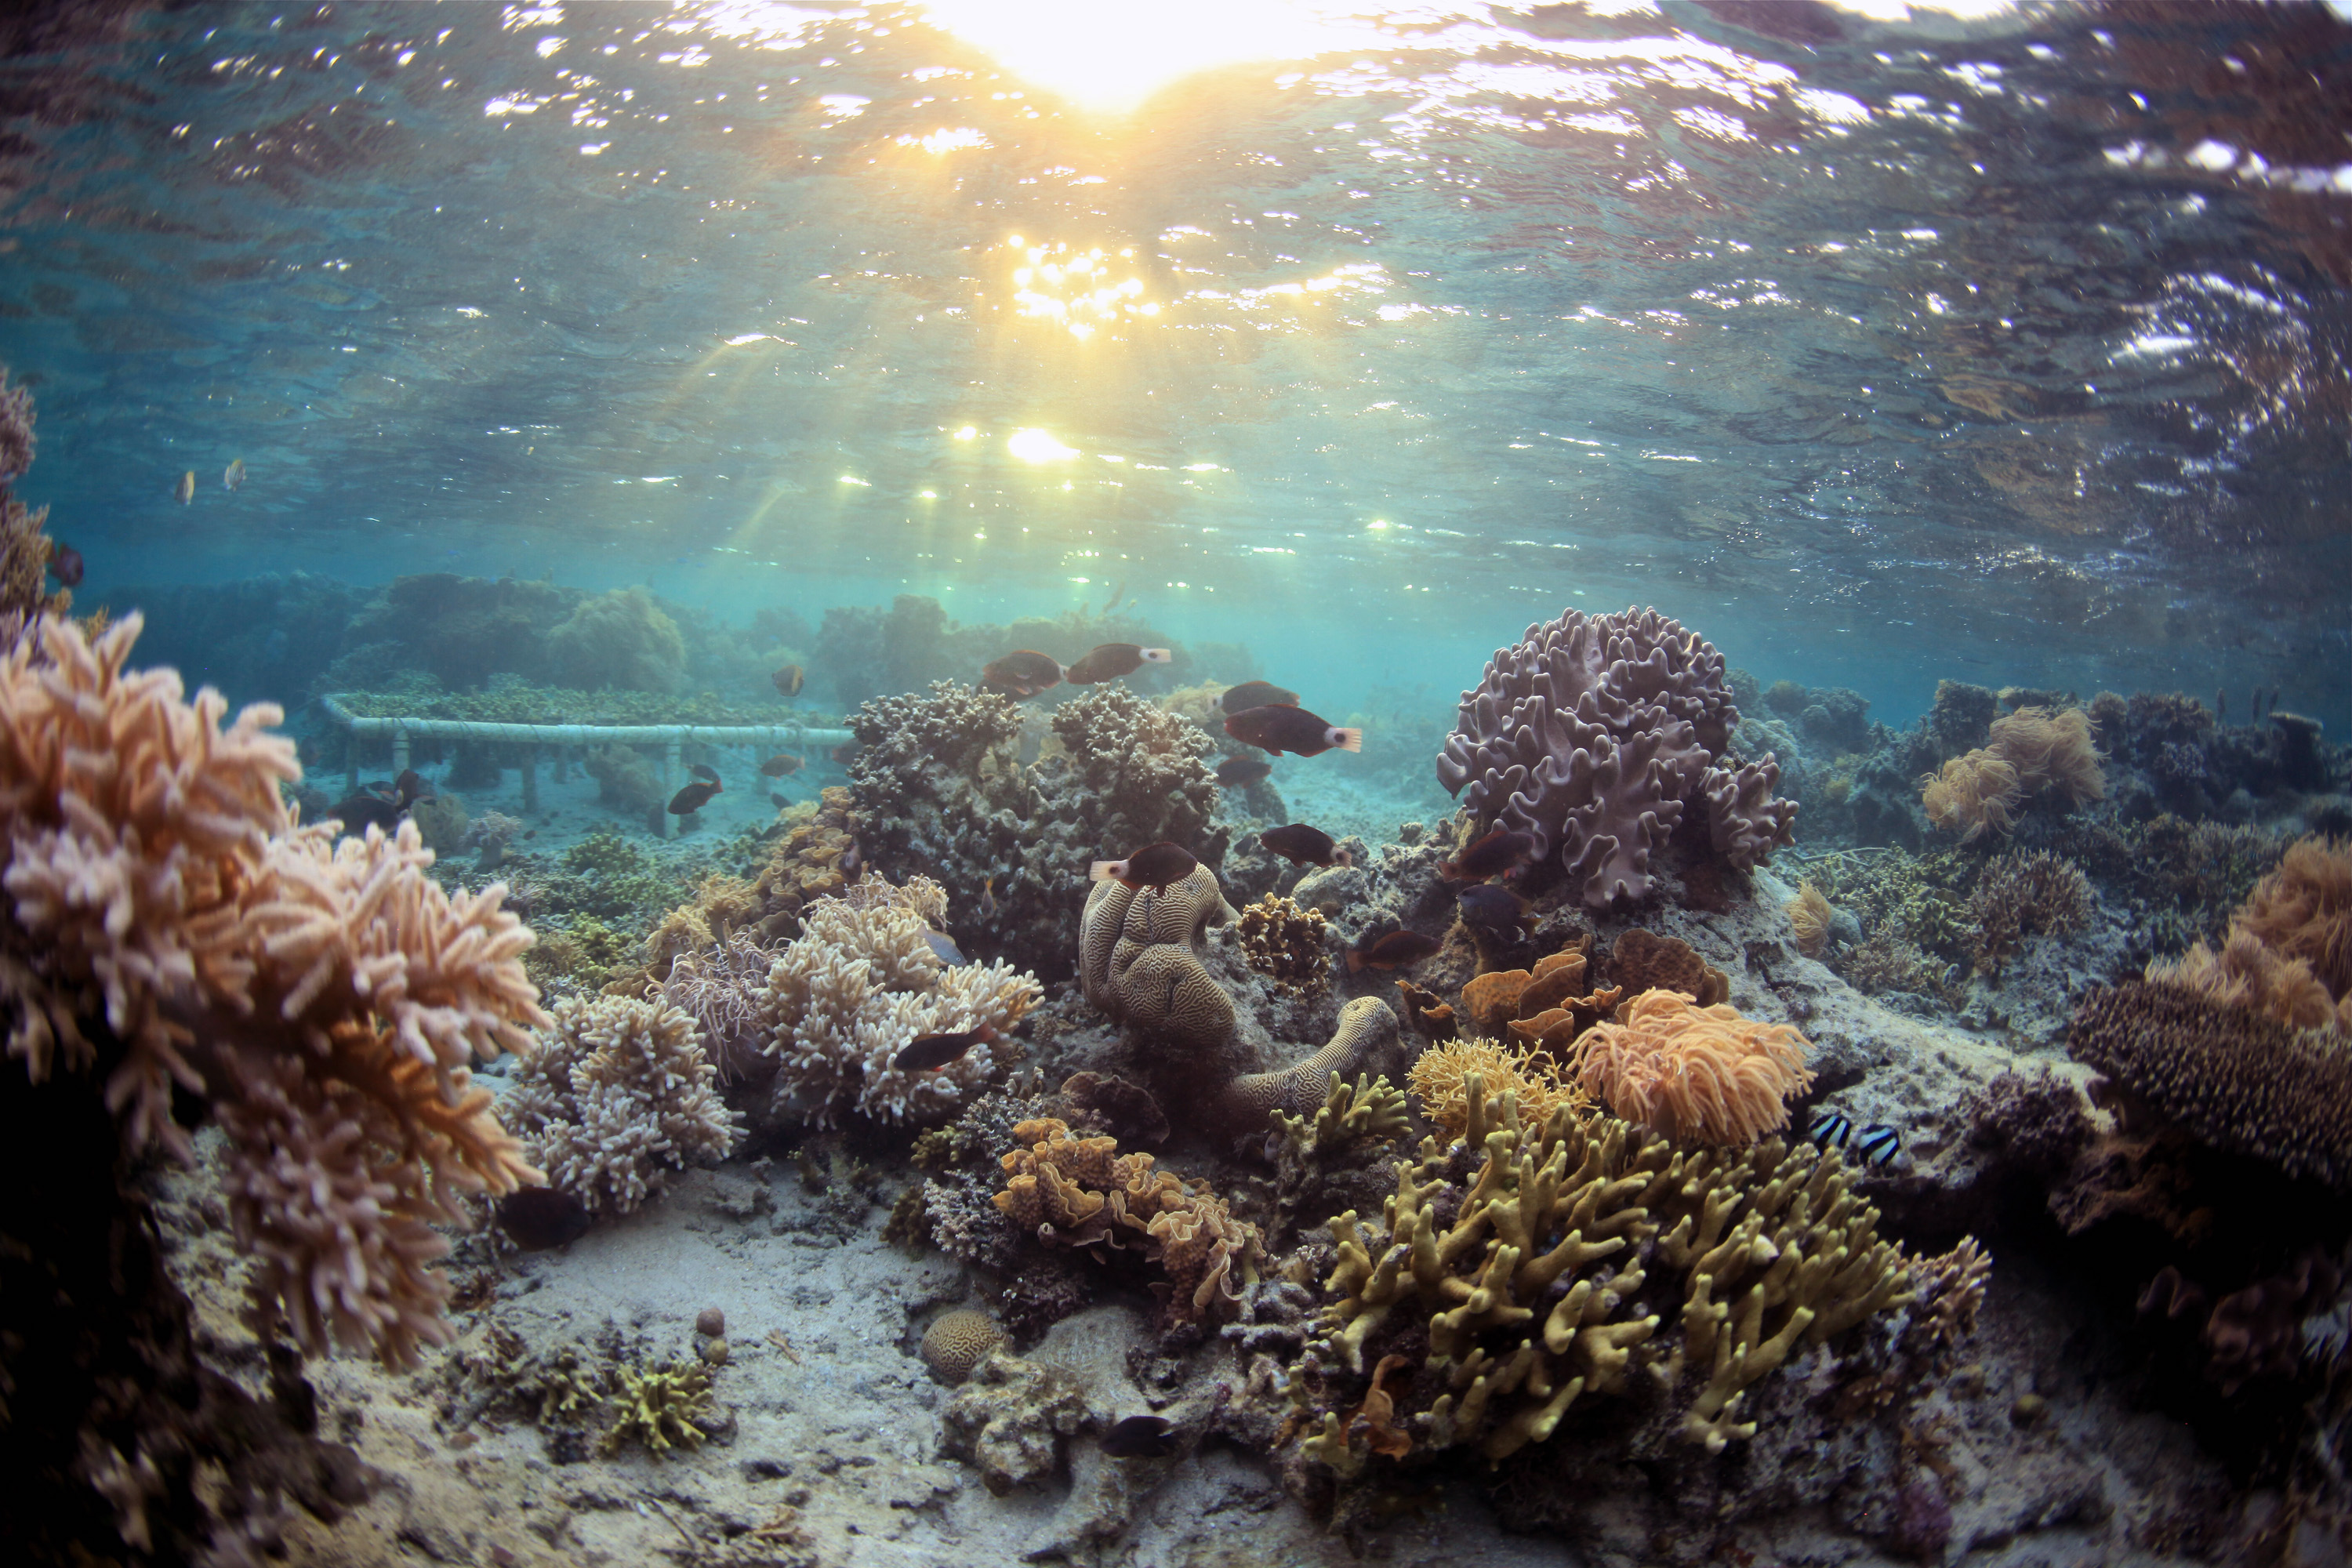 An experimental coral rack is deployed on a shallow reef within the marine reserve at Totua, Viti Levu, Fiji. The rack was used for research into chemical warfare between seaweeds and corals. (Photo: Hunter Hay)